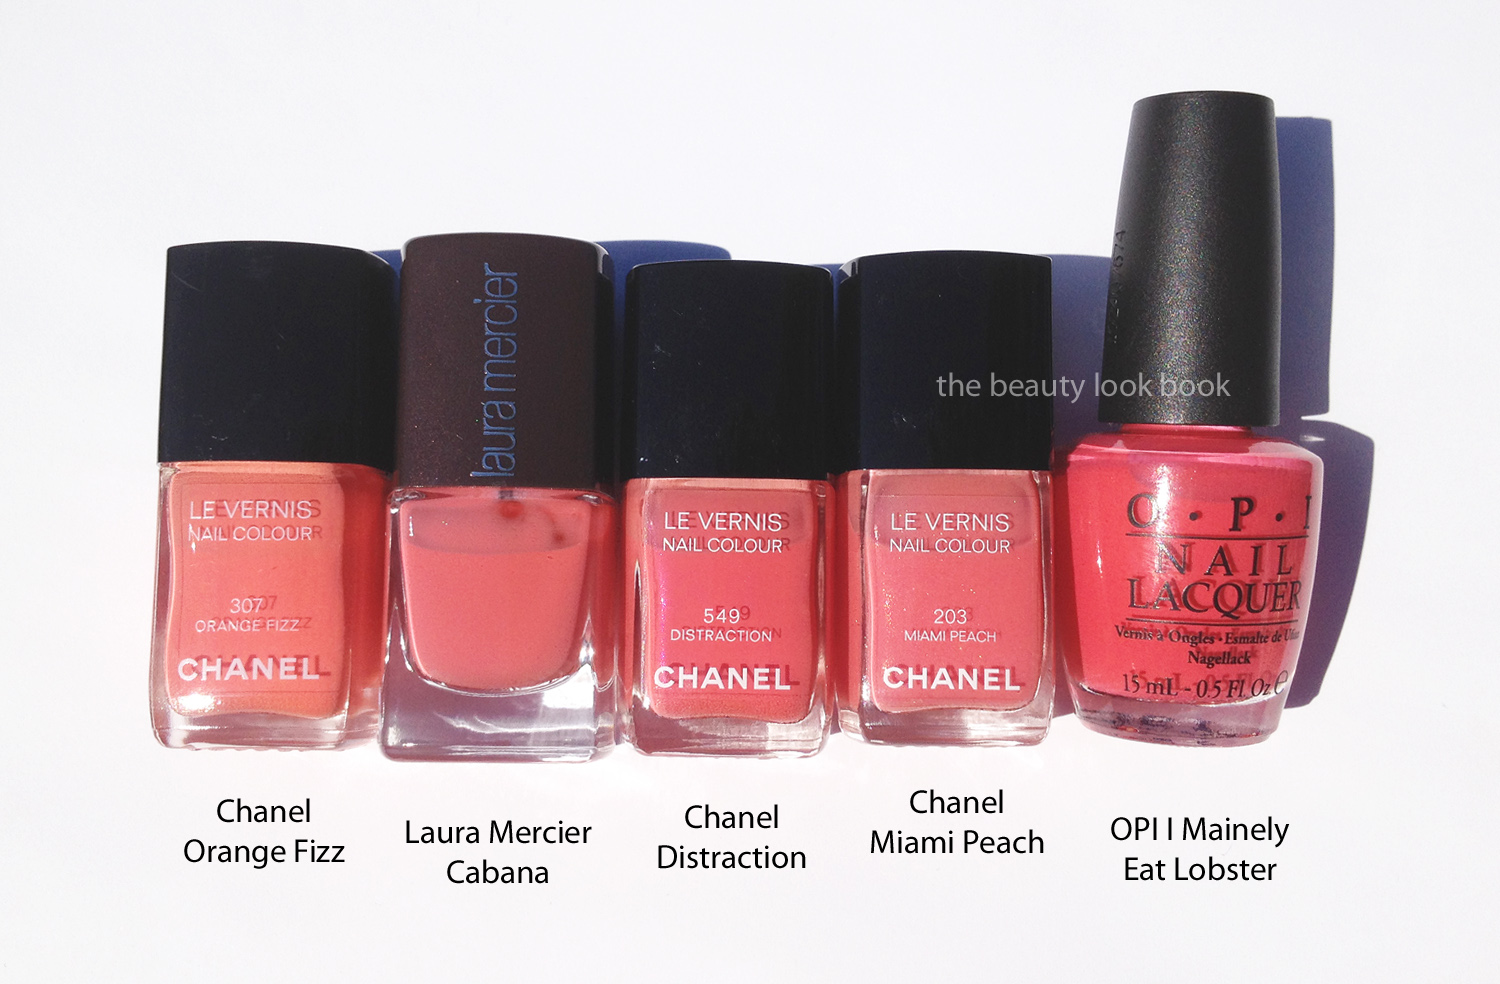 Chanel Distraction 549 Le Vernis - The Beauty Look Book